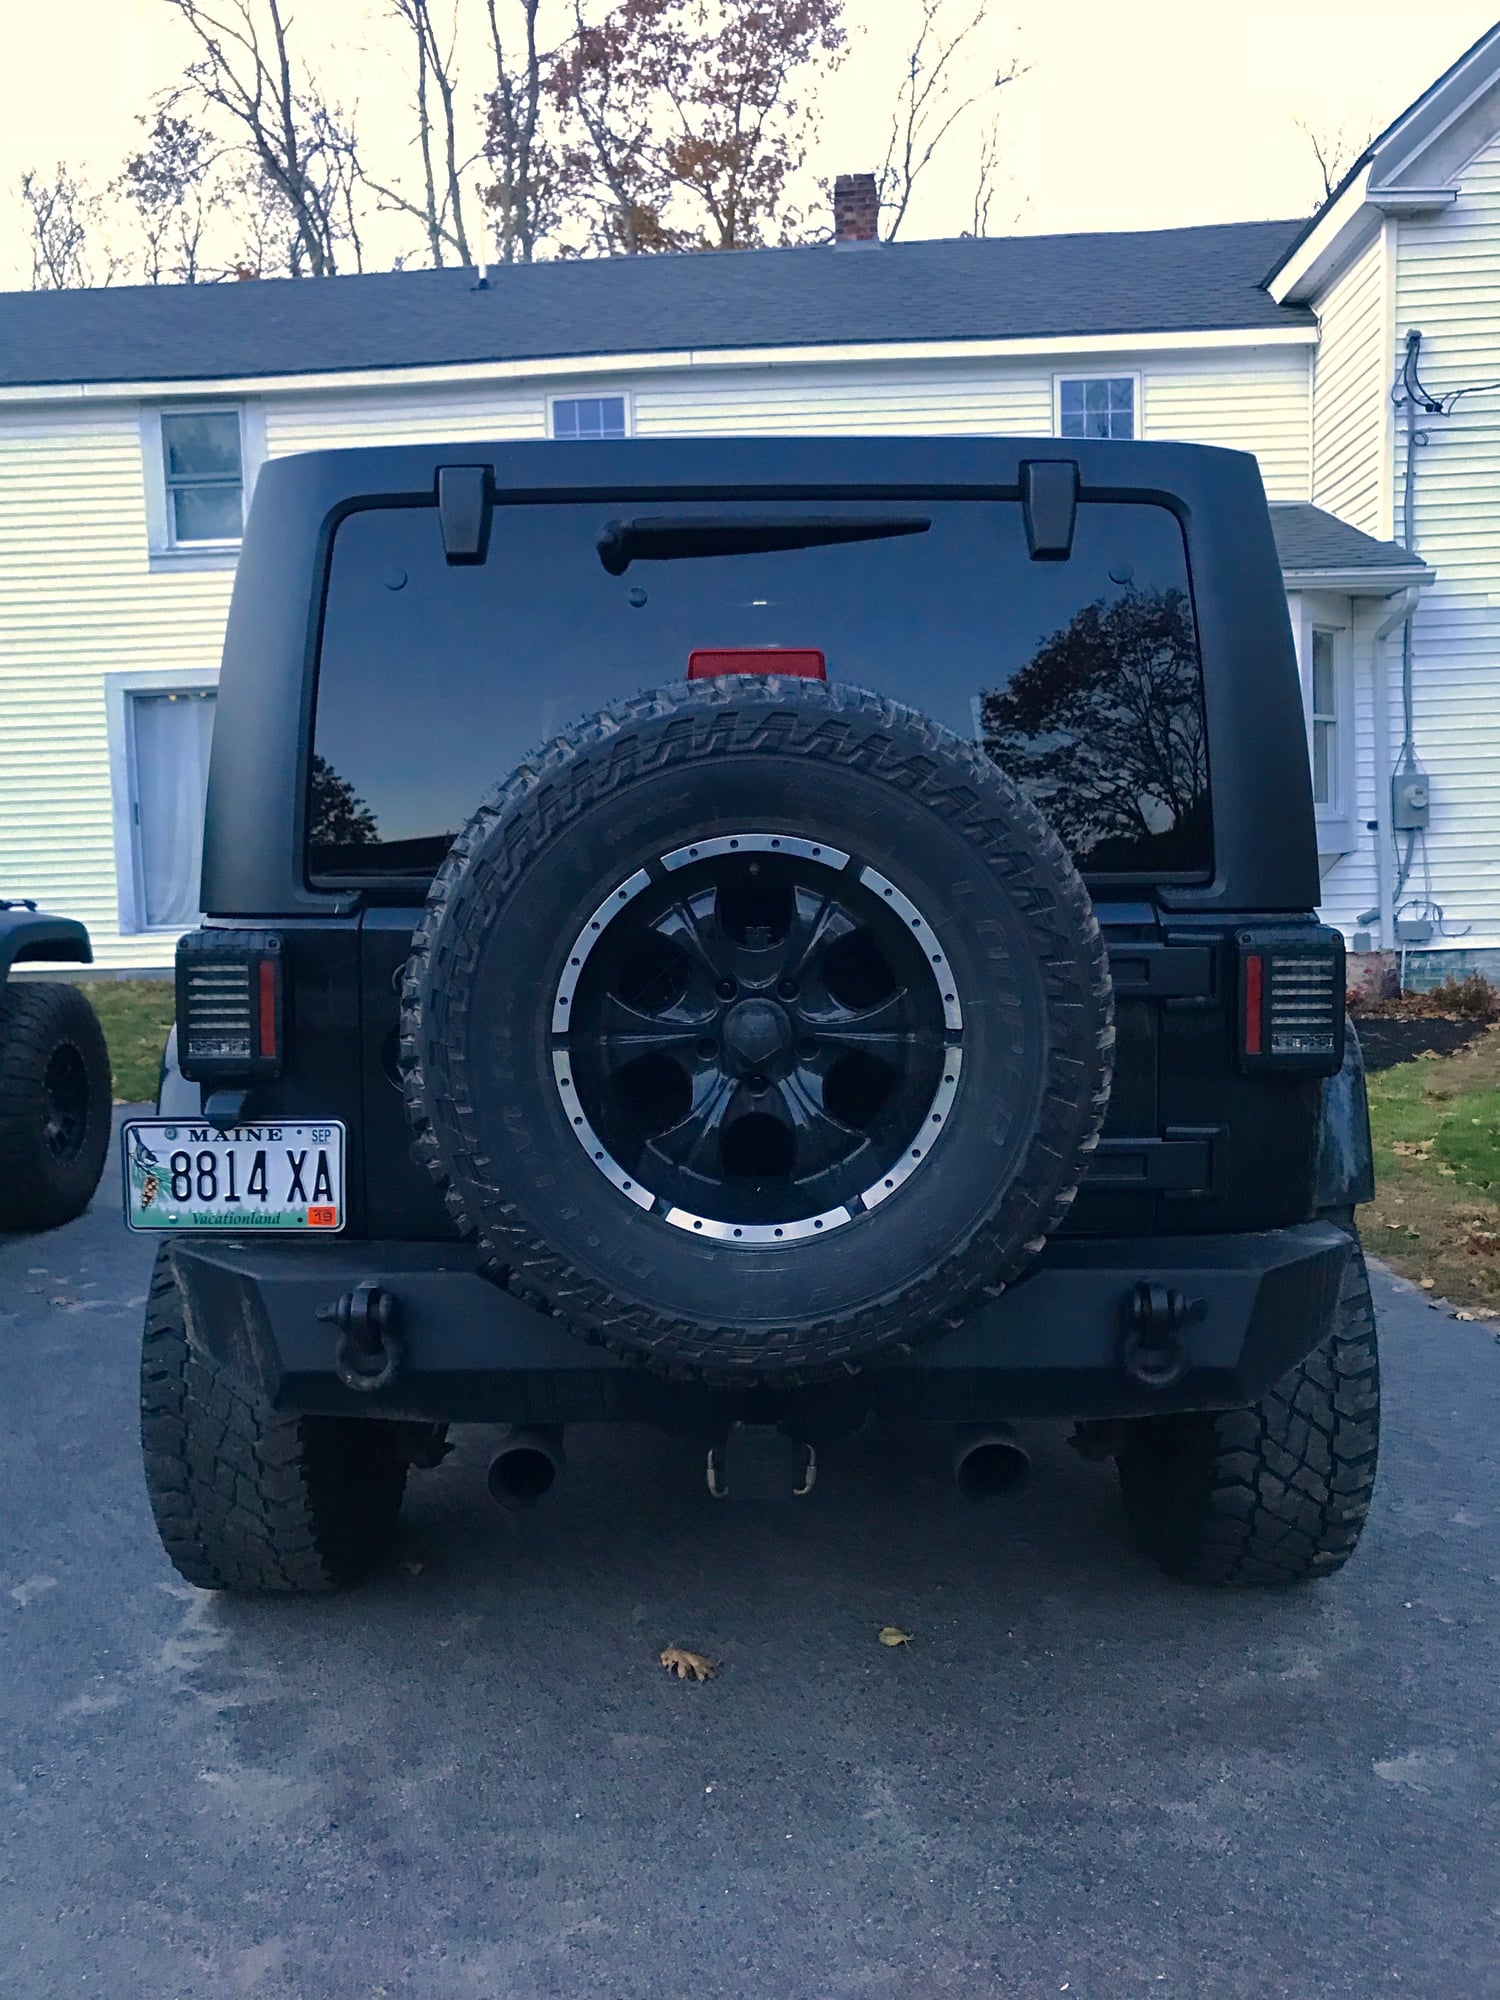 2014 Jeep Wrangler - 2014 Jeep Wrangler Sahara Unlimited (4 door) lifted - Used - VIN 1c4bjwegxel201117 - 64,000 Miles - 6 cyl - 4WD - Manual - SUV - Black - Scarborough, ME 04074, United States